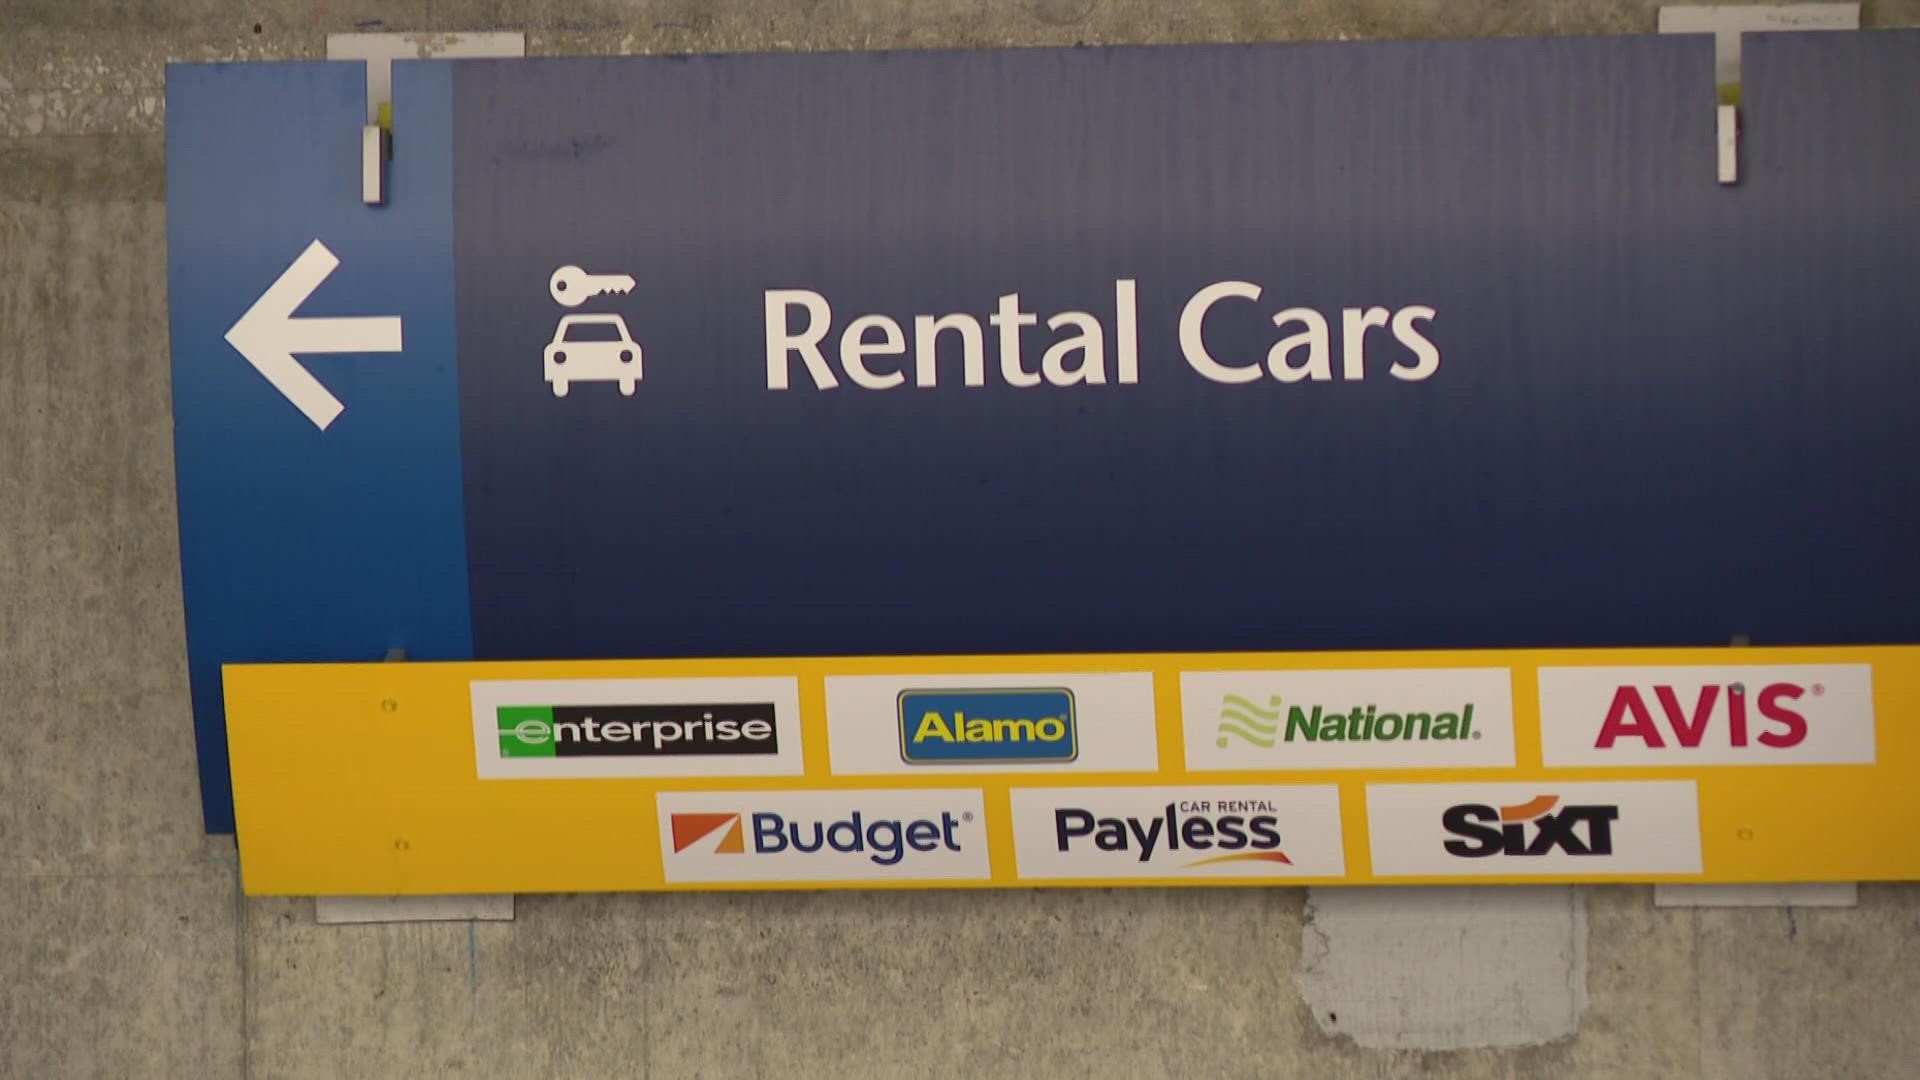 DIA said its car rental fee has been the same since the airport opened in 1995.